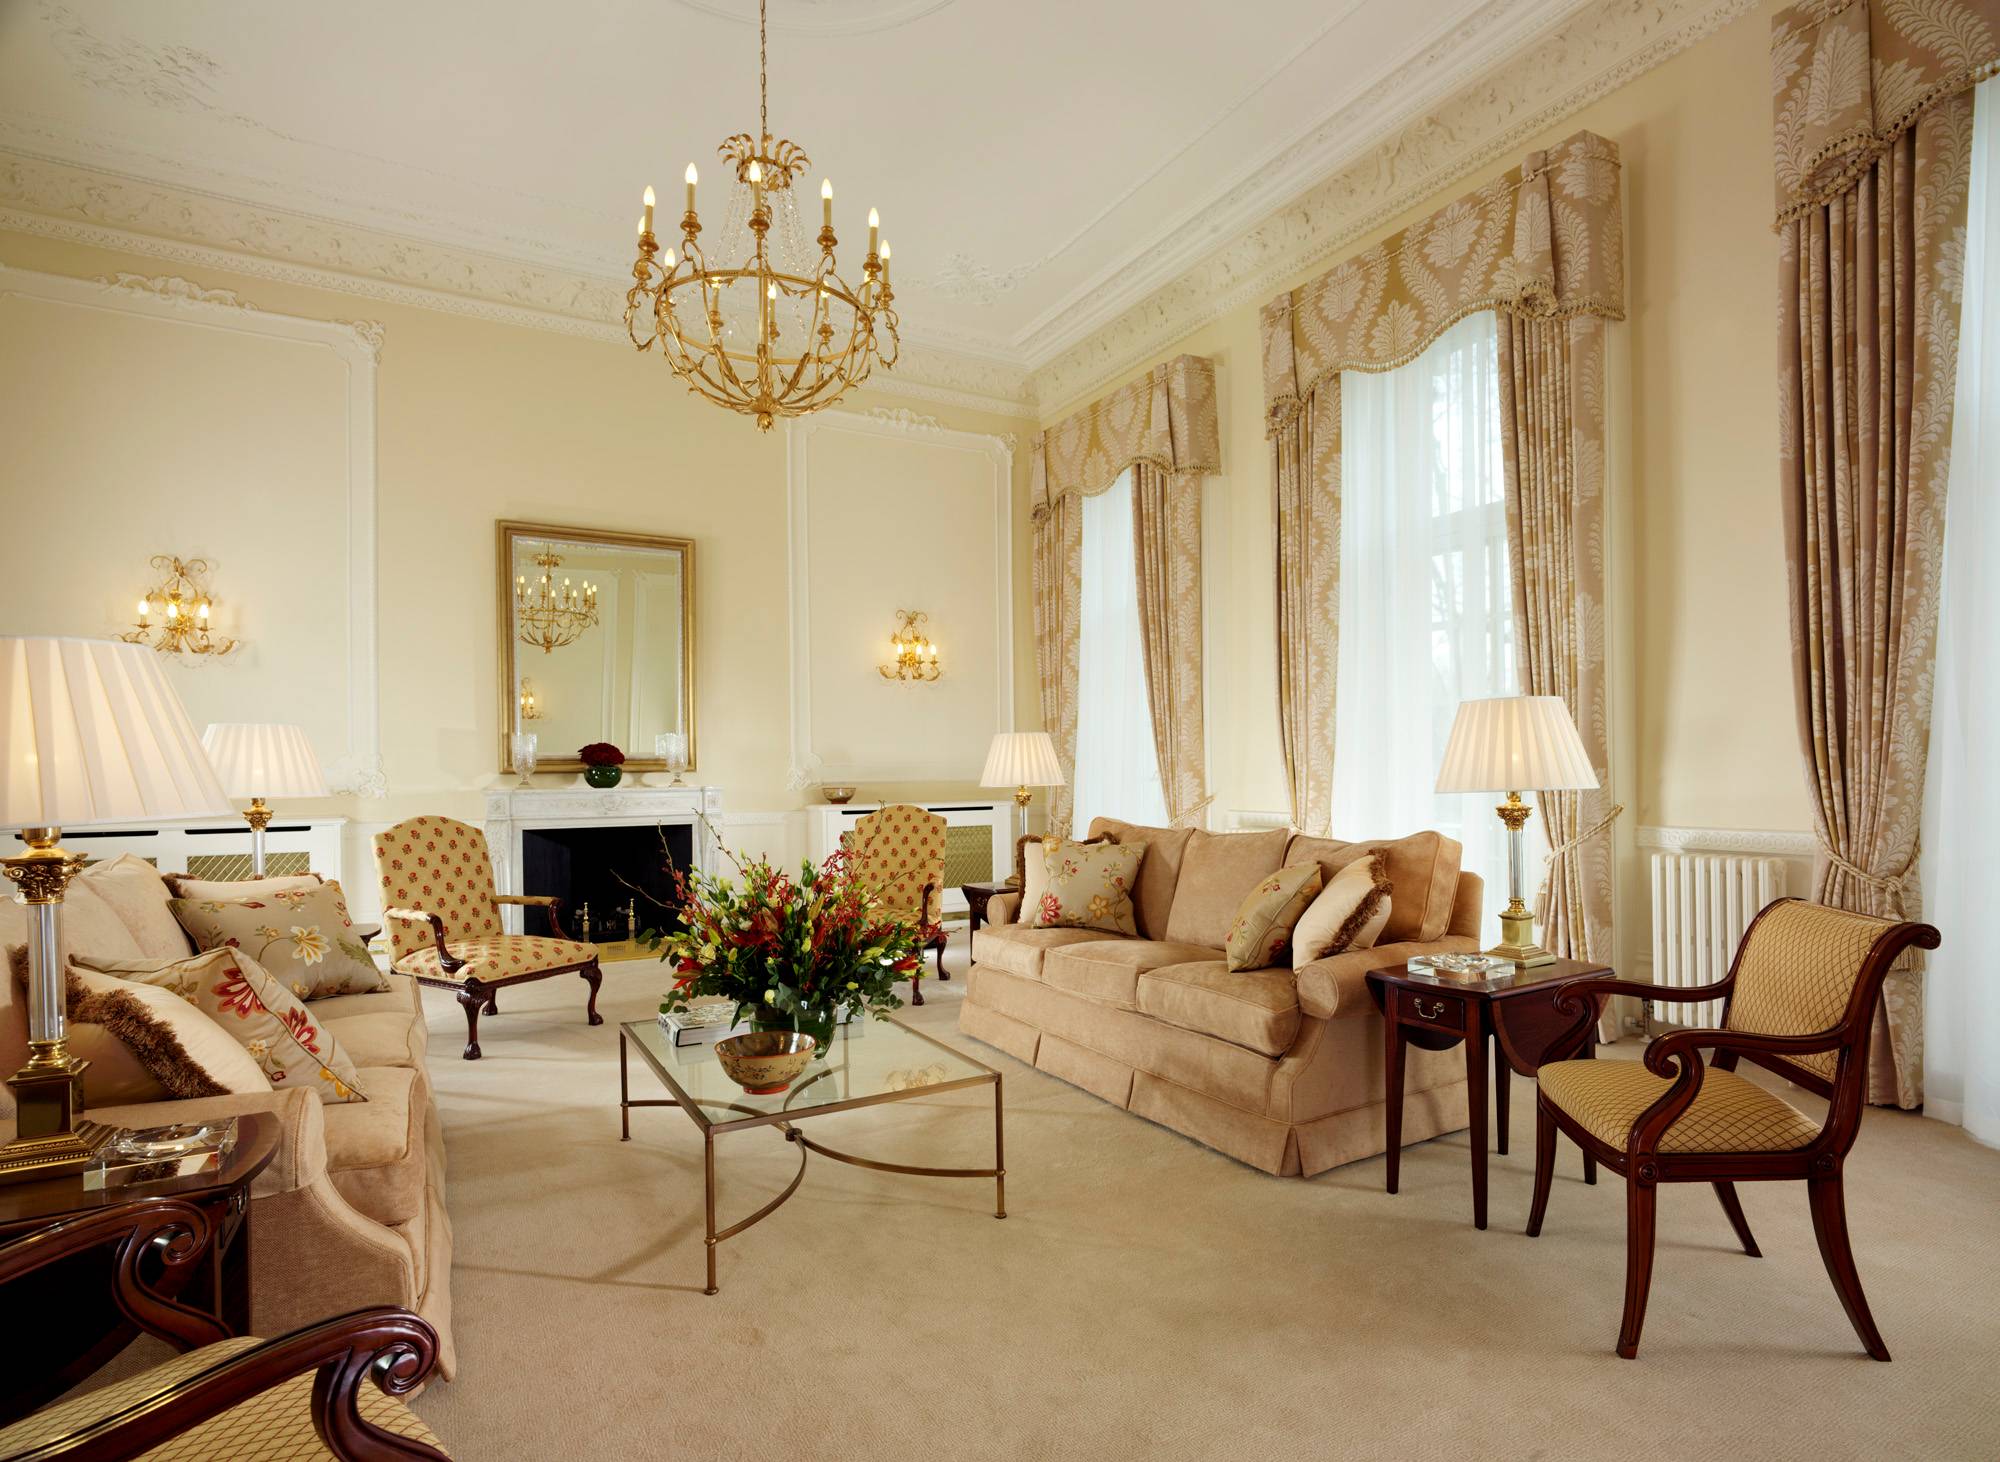 Deluxe First-Floor Three-Bedroom Serviced Apartment in a Palatial Kensington Residence with Spectacular Hyde Park Views and Luxury Amenities